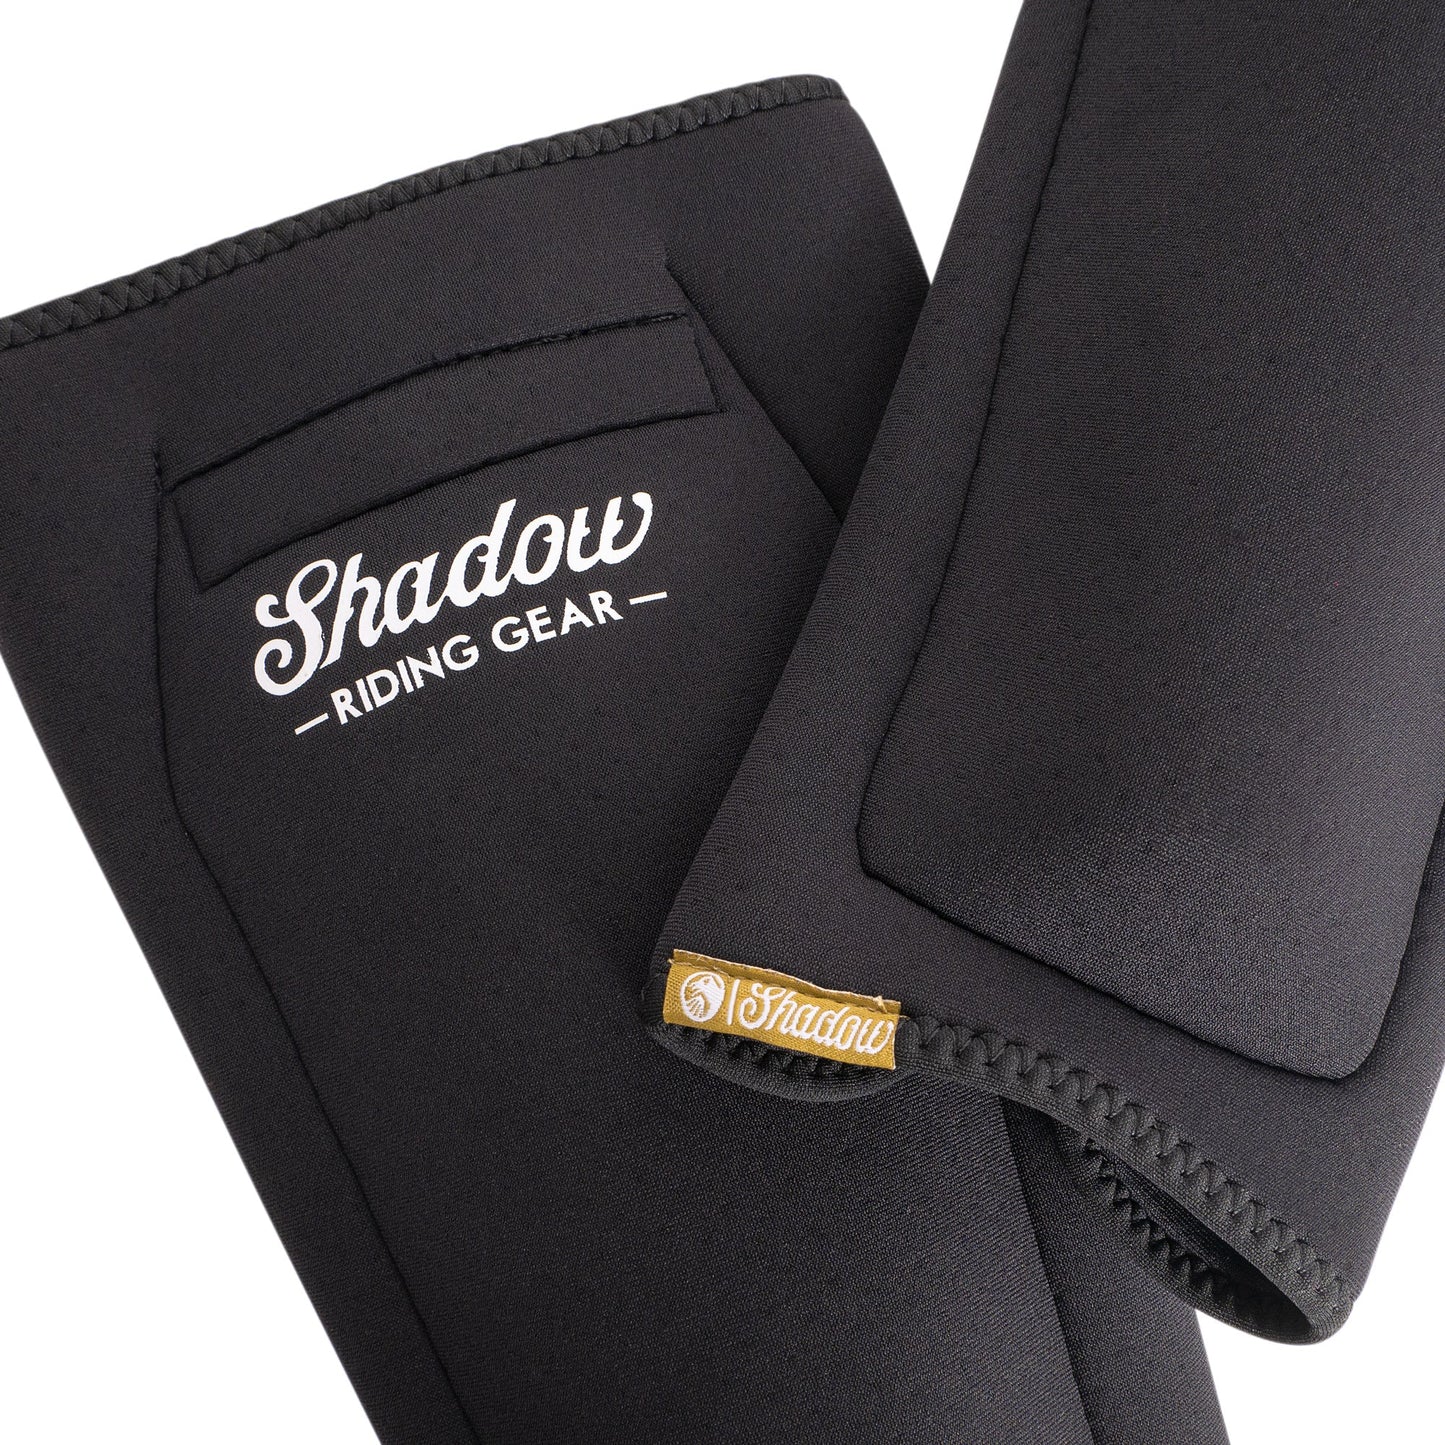 Shadow Super Slim Shinners Shin Guards - Sparkys Brands Sparkys Brands  Protection, Riding Gear, Shadow Riding Gear, Shin, Super Slim, The Shadow Conspiracy bmx pro quality freestyle bicycle